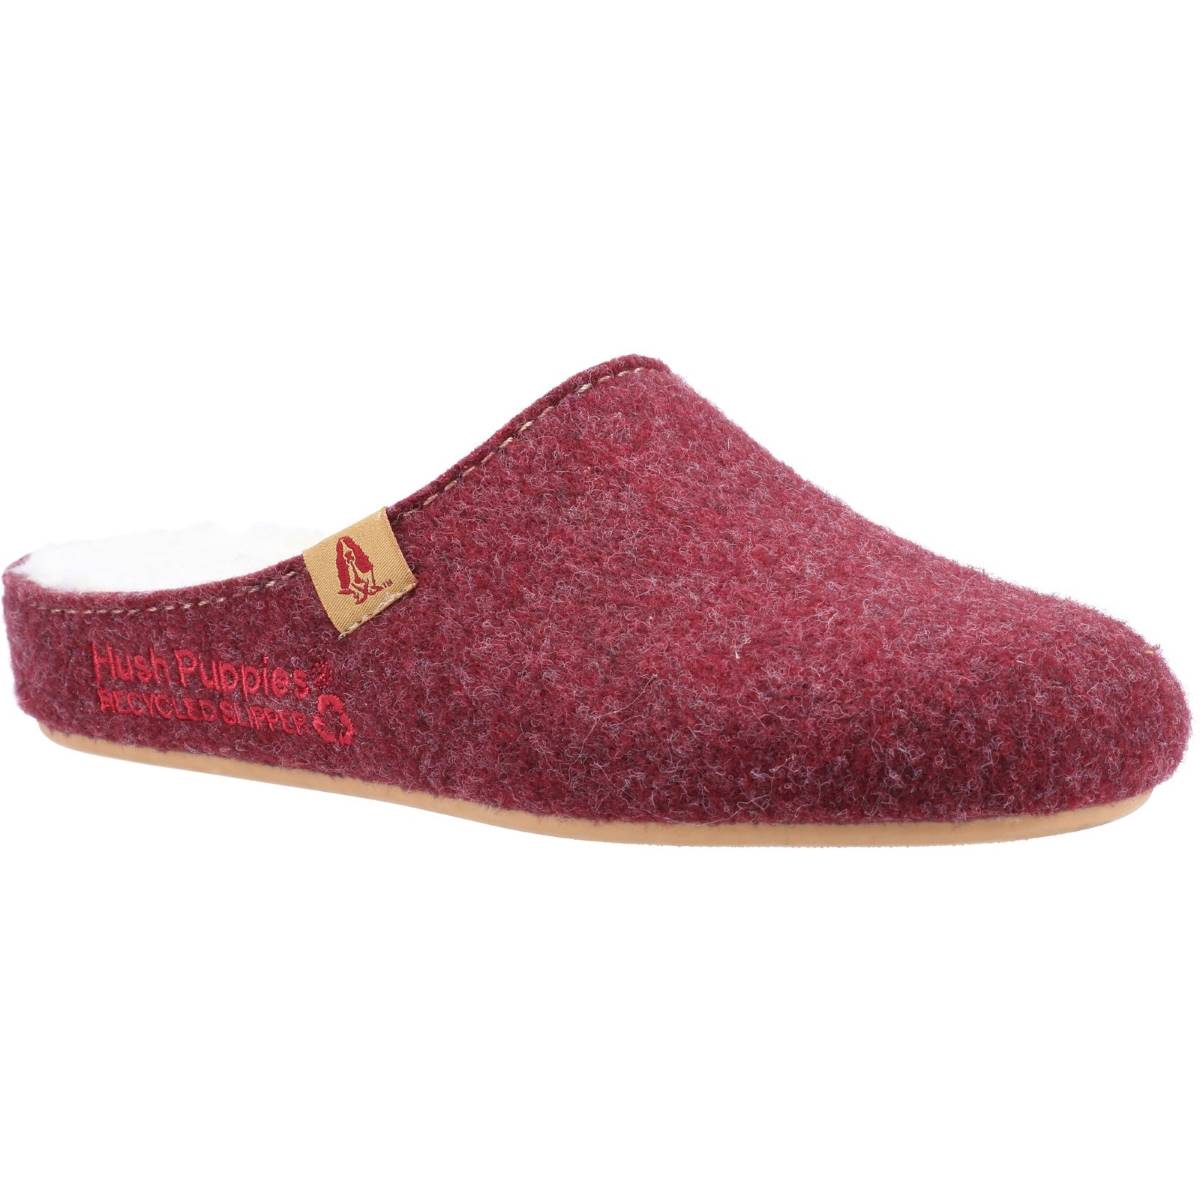 Hush Puppies The Good Slipper Burgundy Womens slippers HPW1000-199-1 in a Plain Textile in Size 3